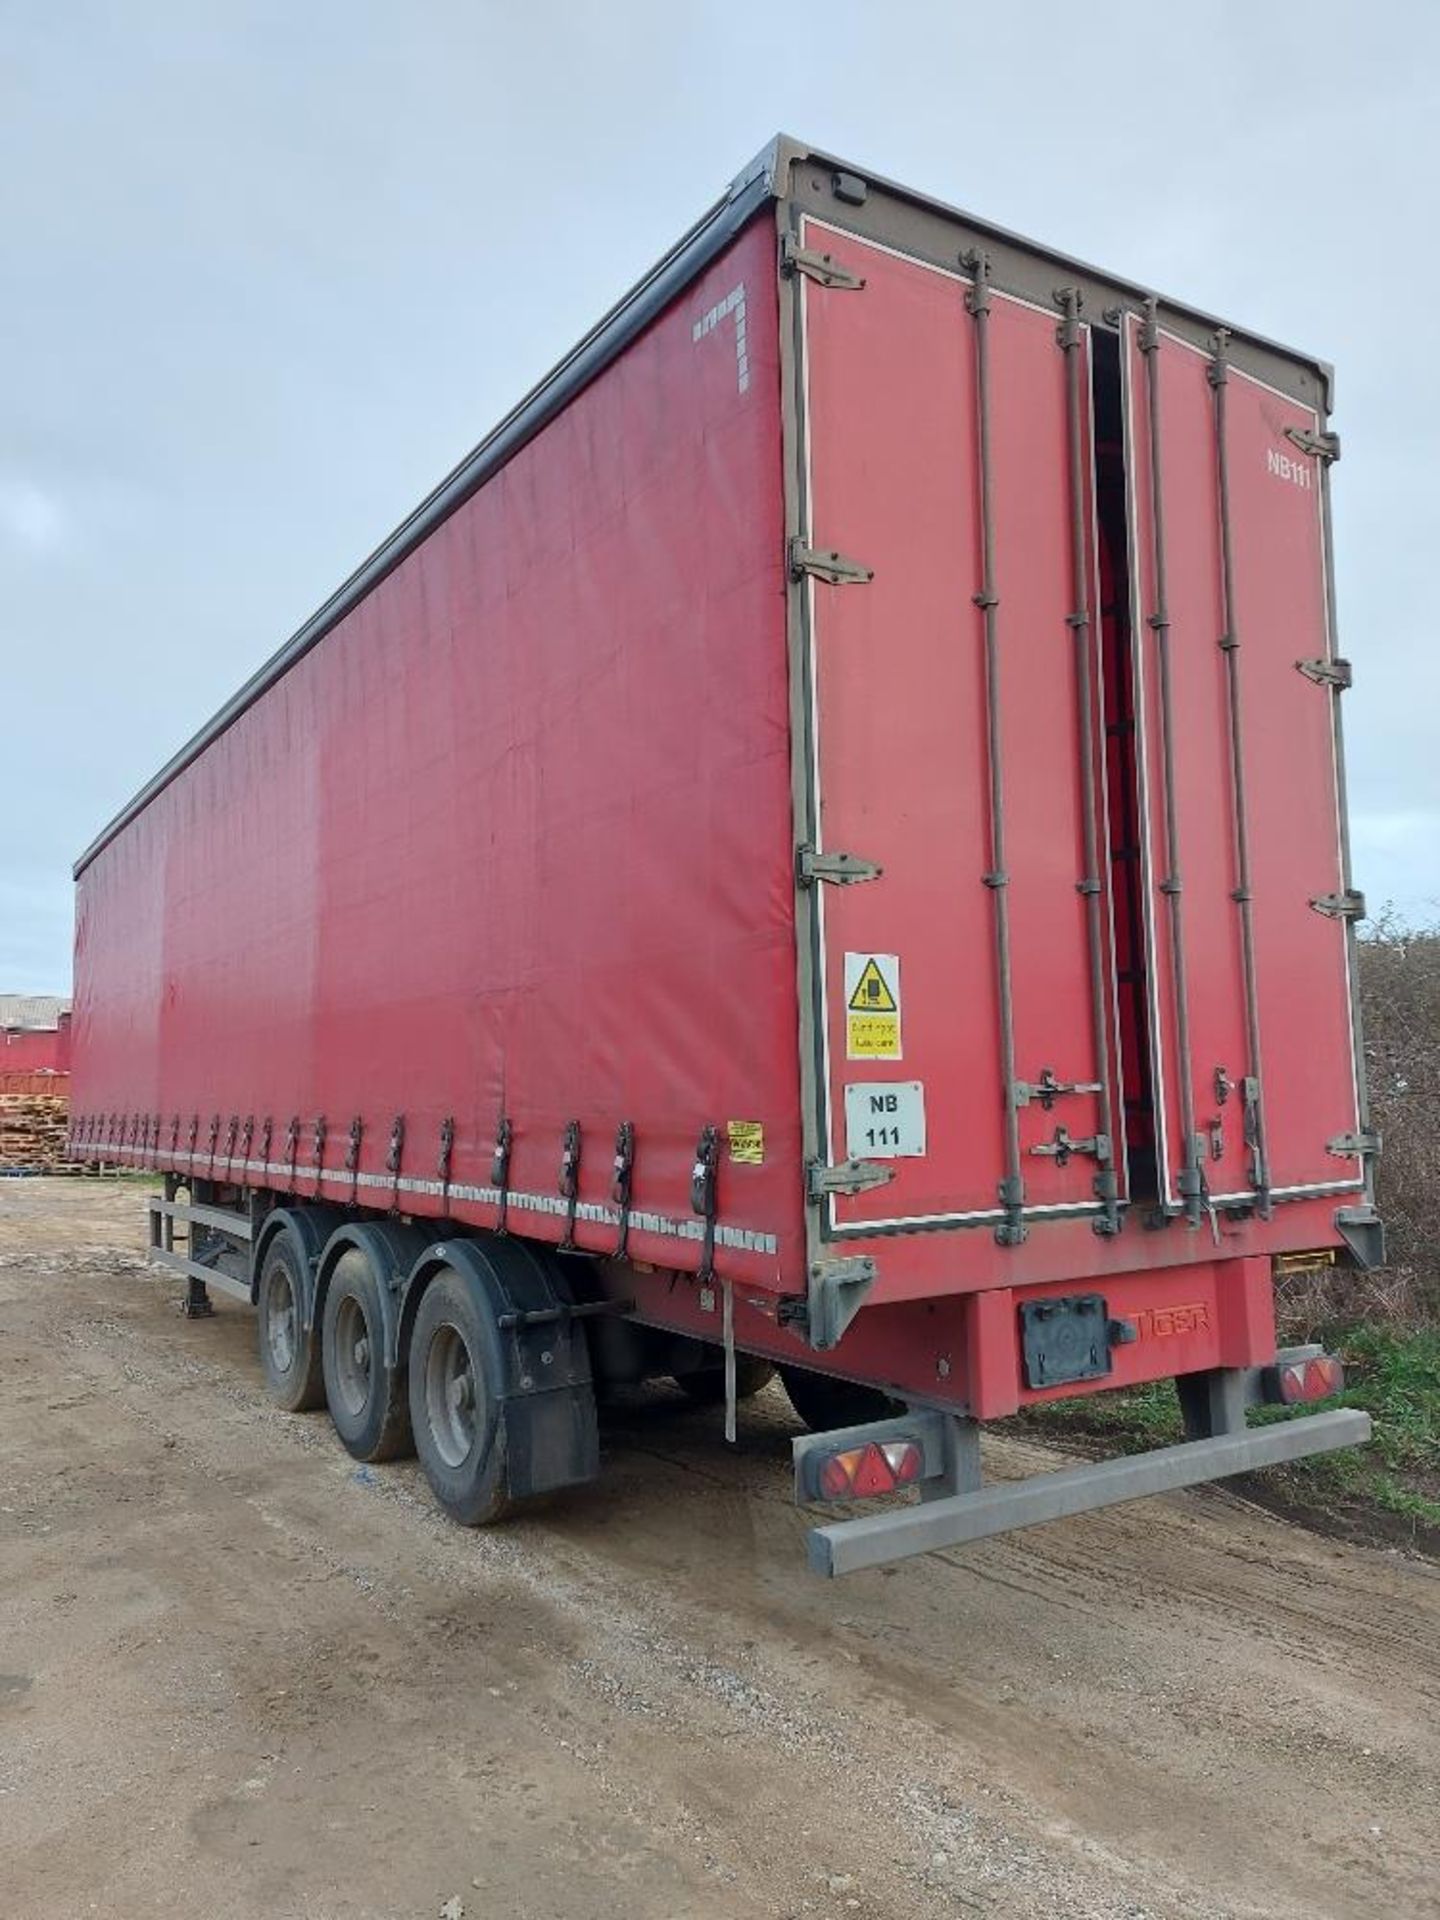 Tiger Tri-Axle 13.7m Curtain Side Trailer Unit - Image 4 of 8